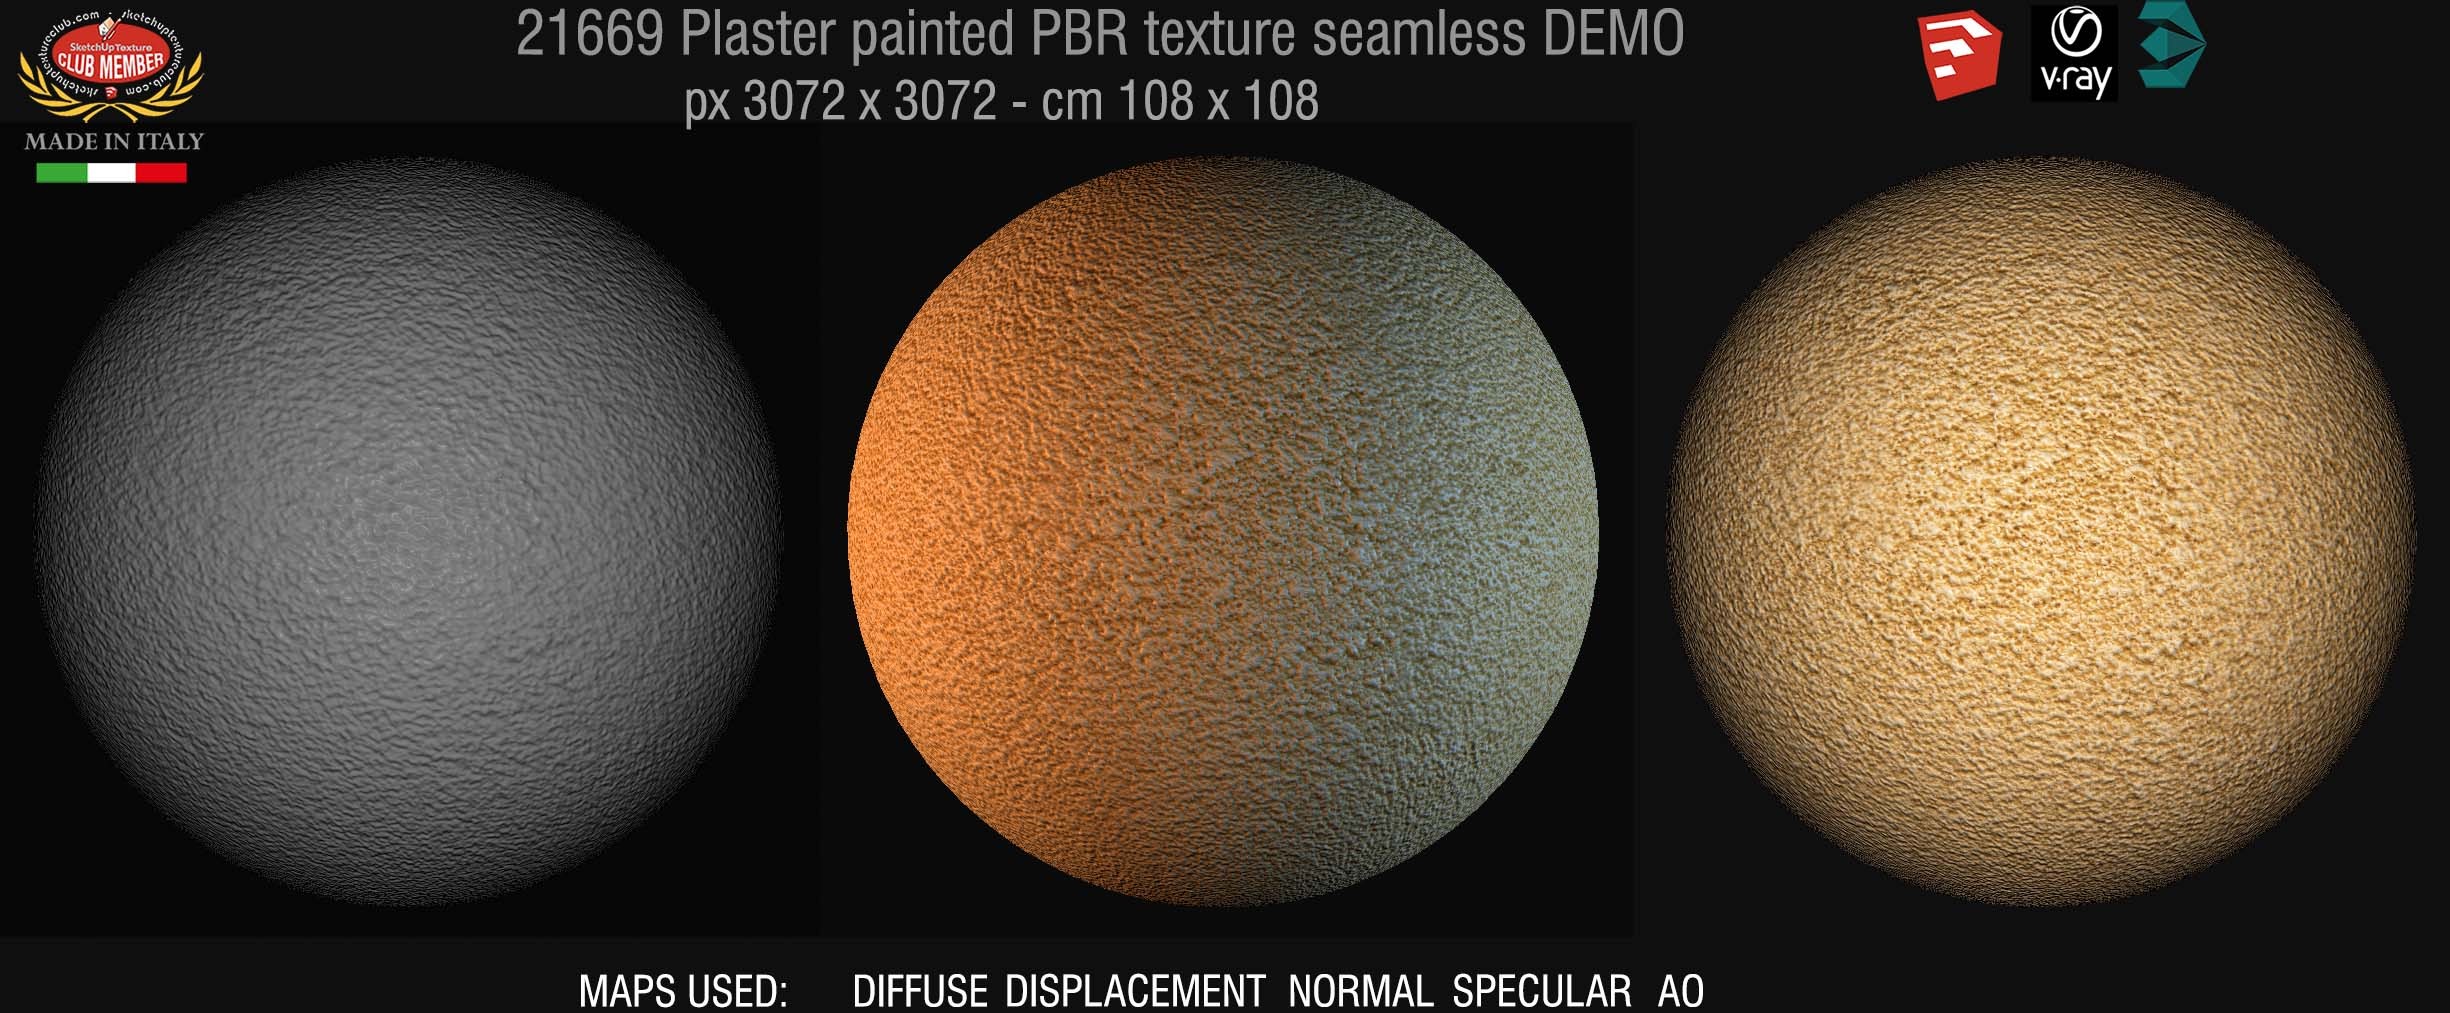 21669 plaster painted PBR texture seamless DEMO